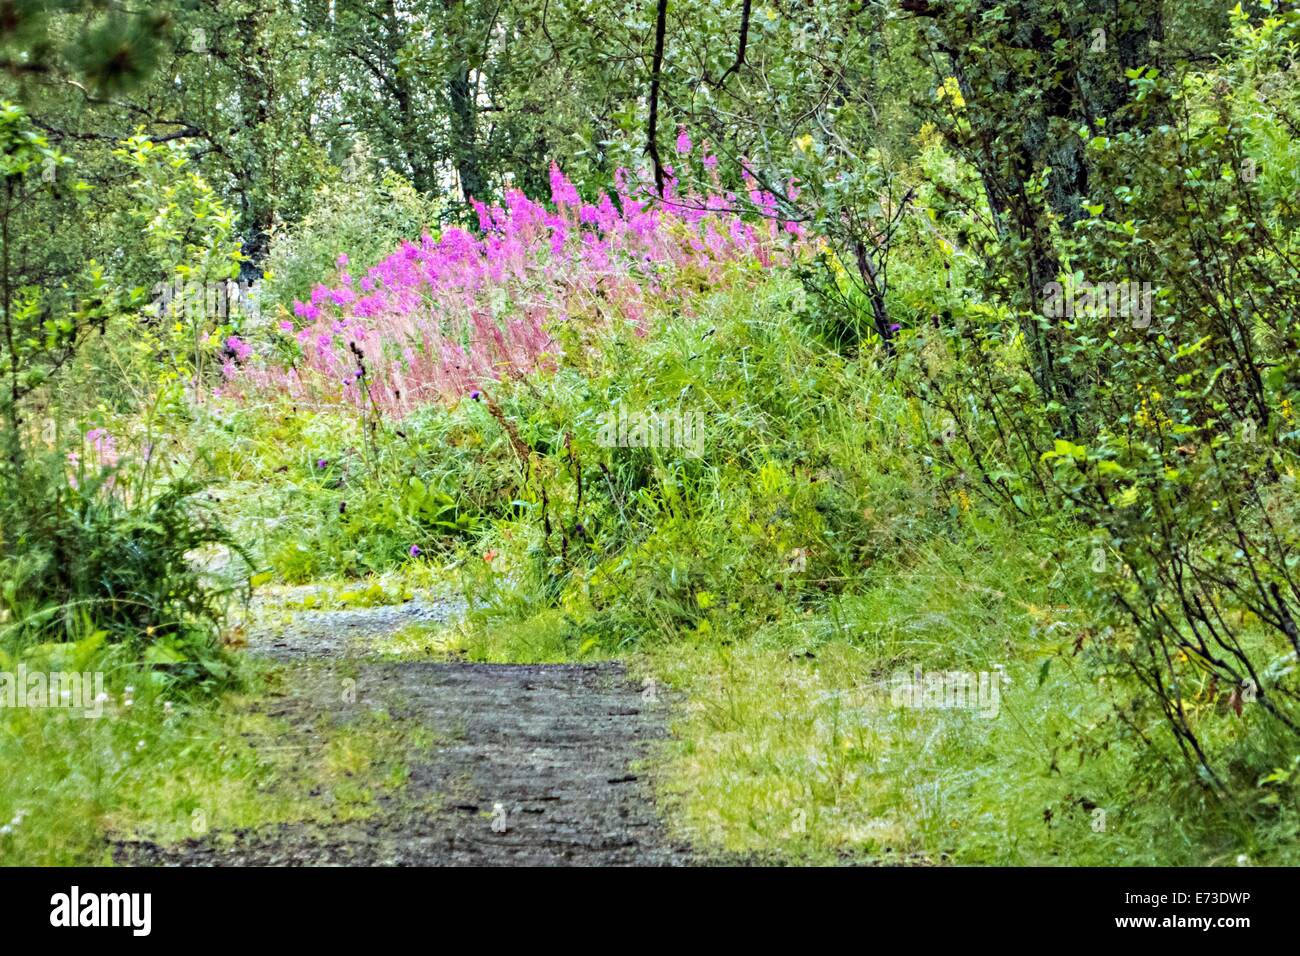 forest track with fireweed, Epilobium sp. Stock Photo